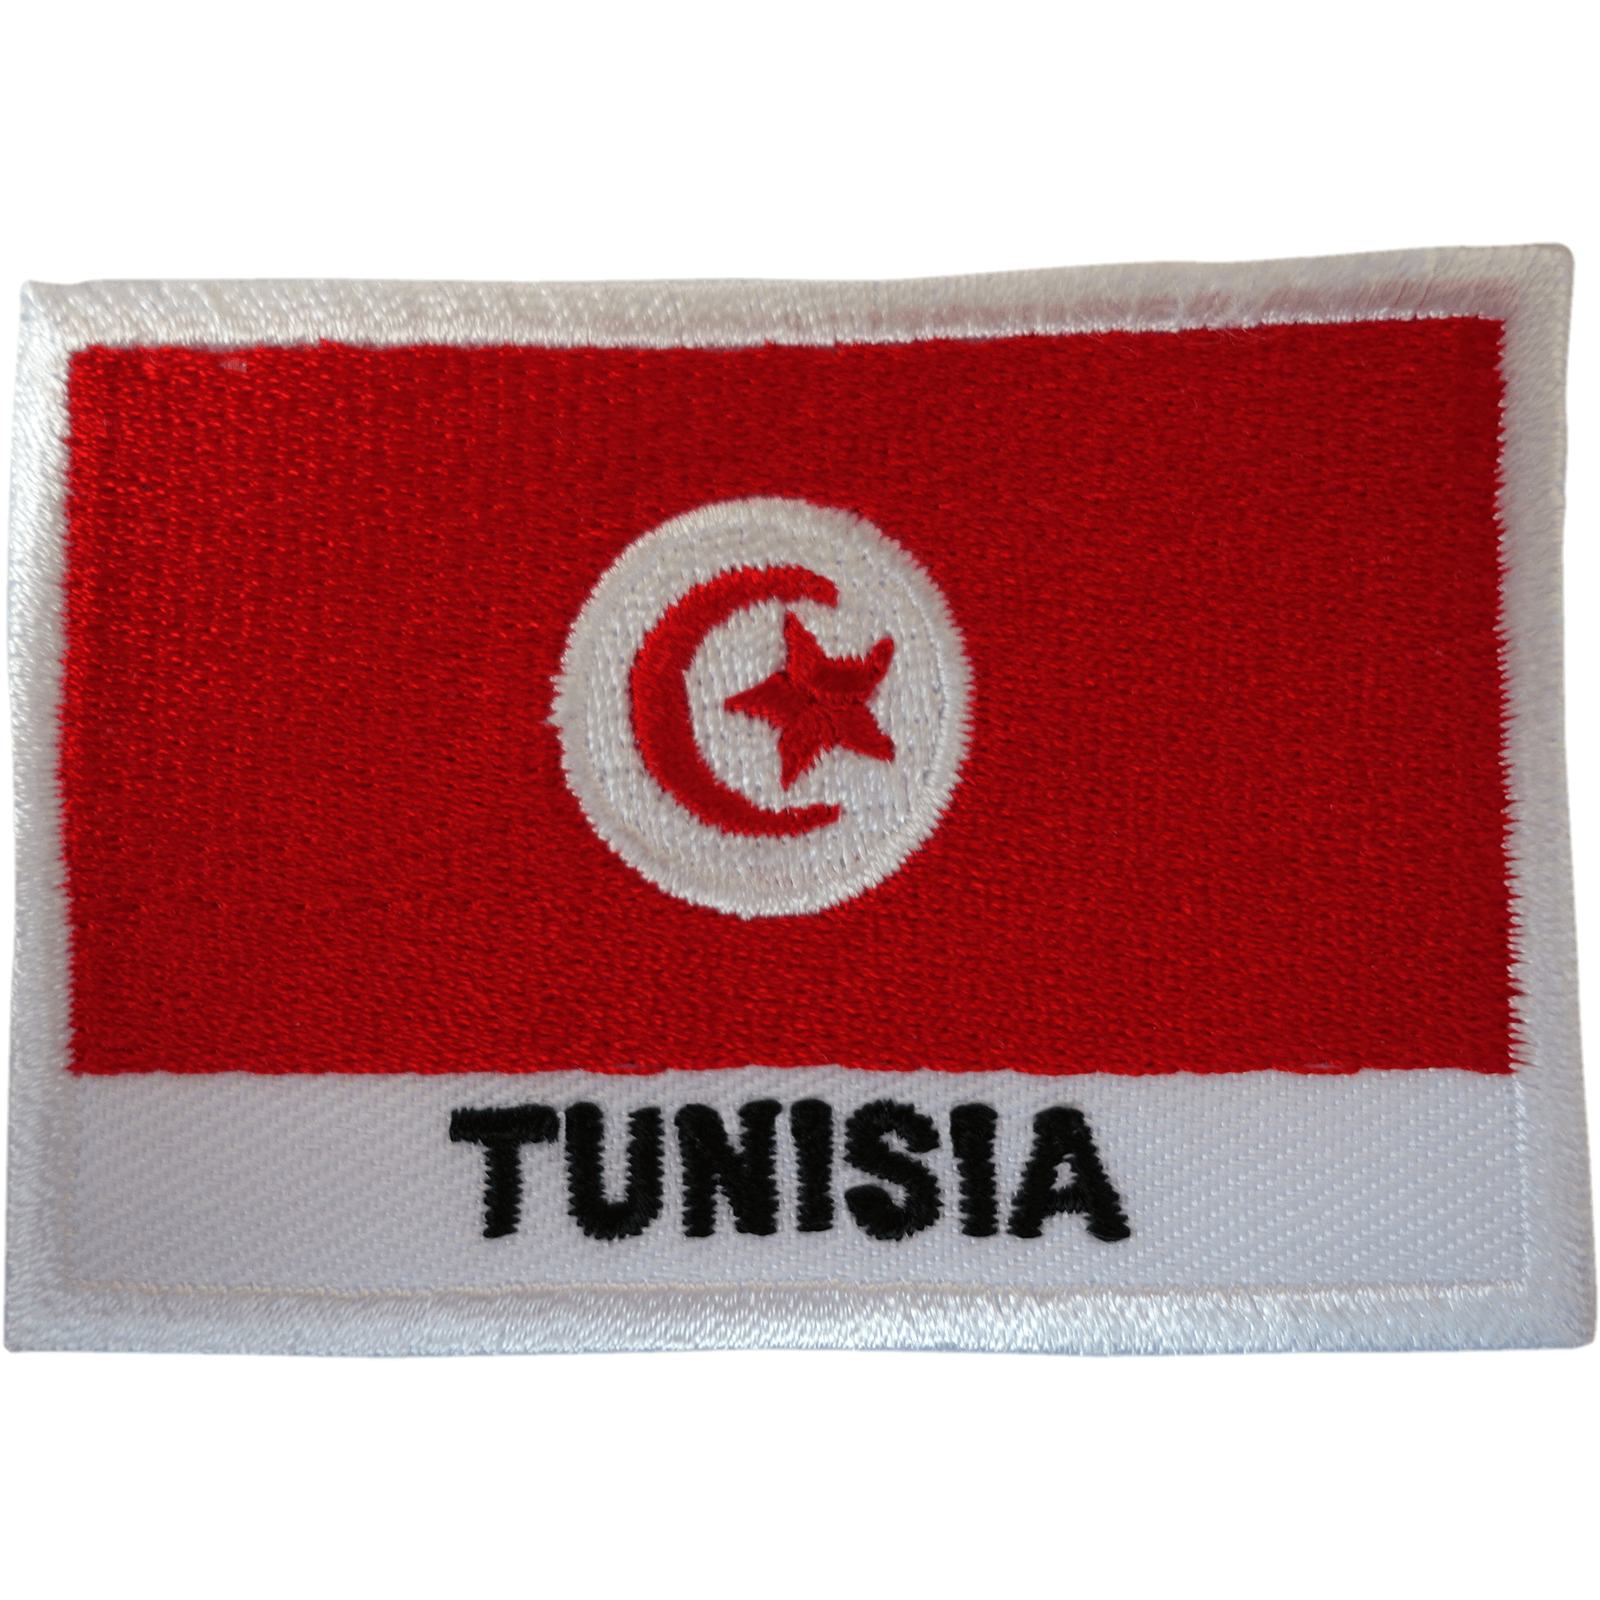 Tunisia Flag Patch Iron On Sew On Clothes Bag Tunisian Africa Embroidered Badge